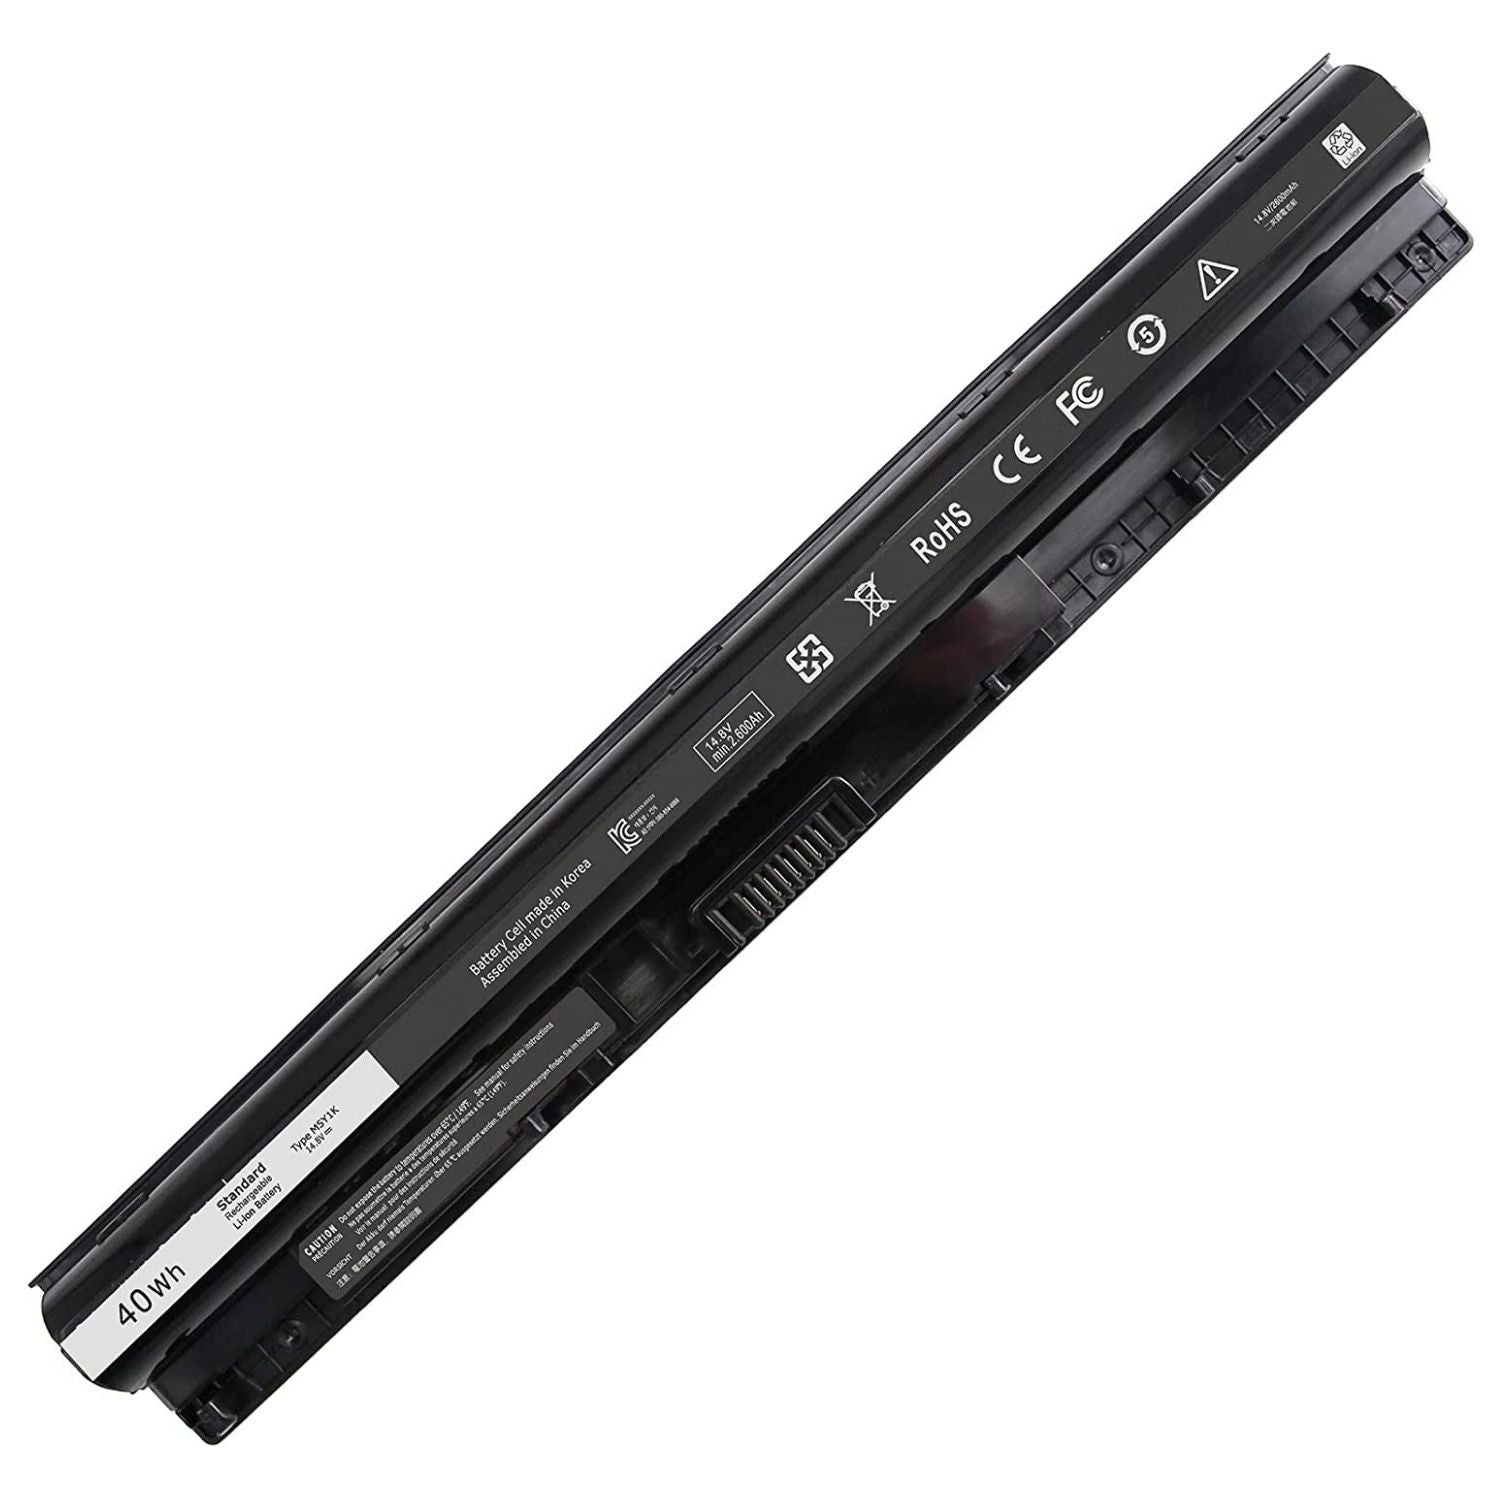 Dell 40WH M5Y1K Battery for Inspiron & vostro 14 15 17 5000 3000 Series 5559 5558 3558 5759 5759 5755 5566 5758 3567 5555 5551 3552 3451 3452 5458 1KFH3 P47F 5545 VN3N0 6YFVW GXVJ3 P51F P63F HD4J0 78V9D 453-BBBQ Series Laptop's.